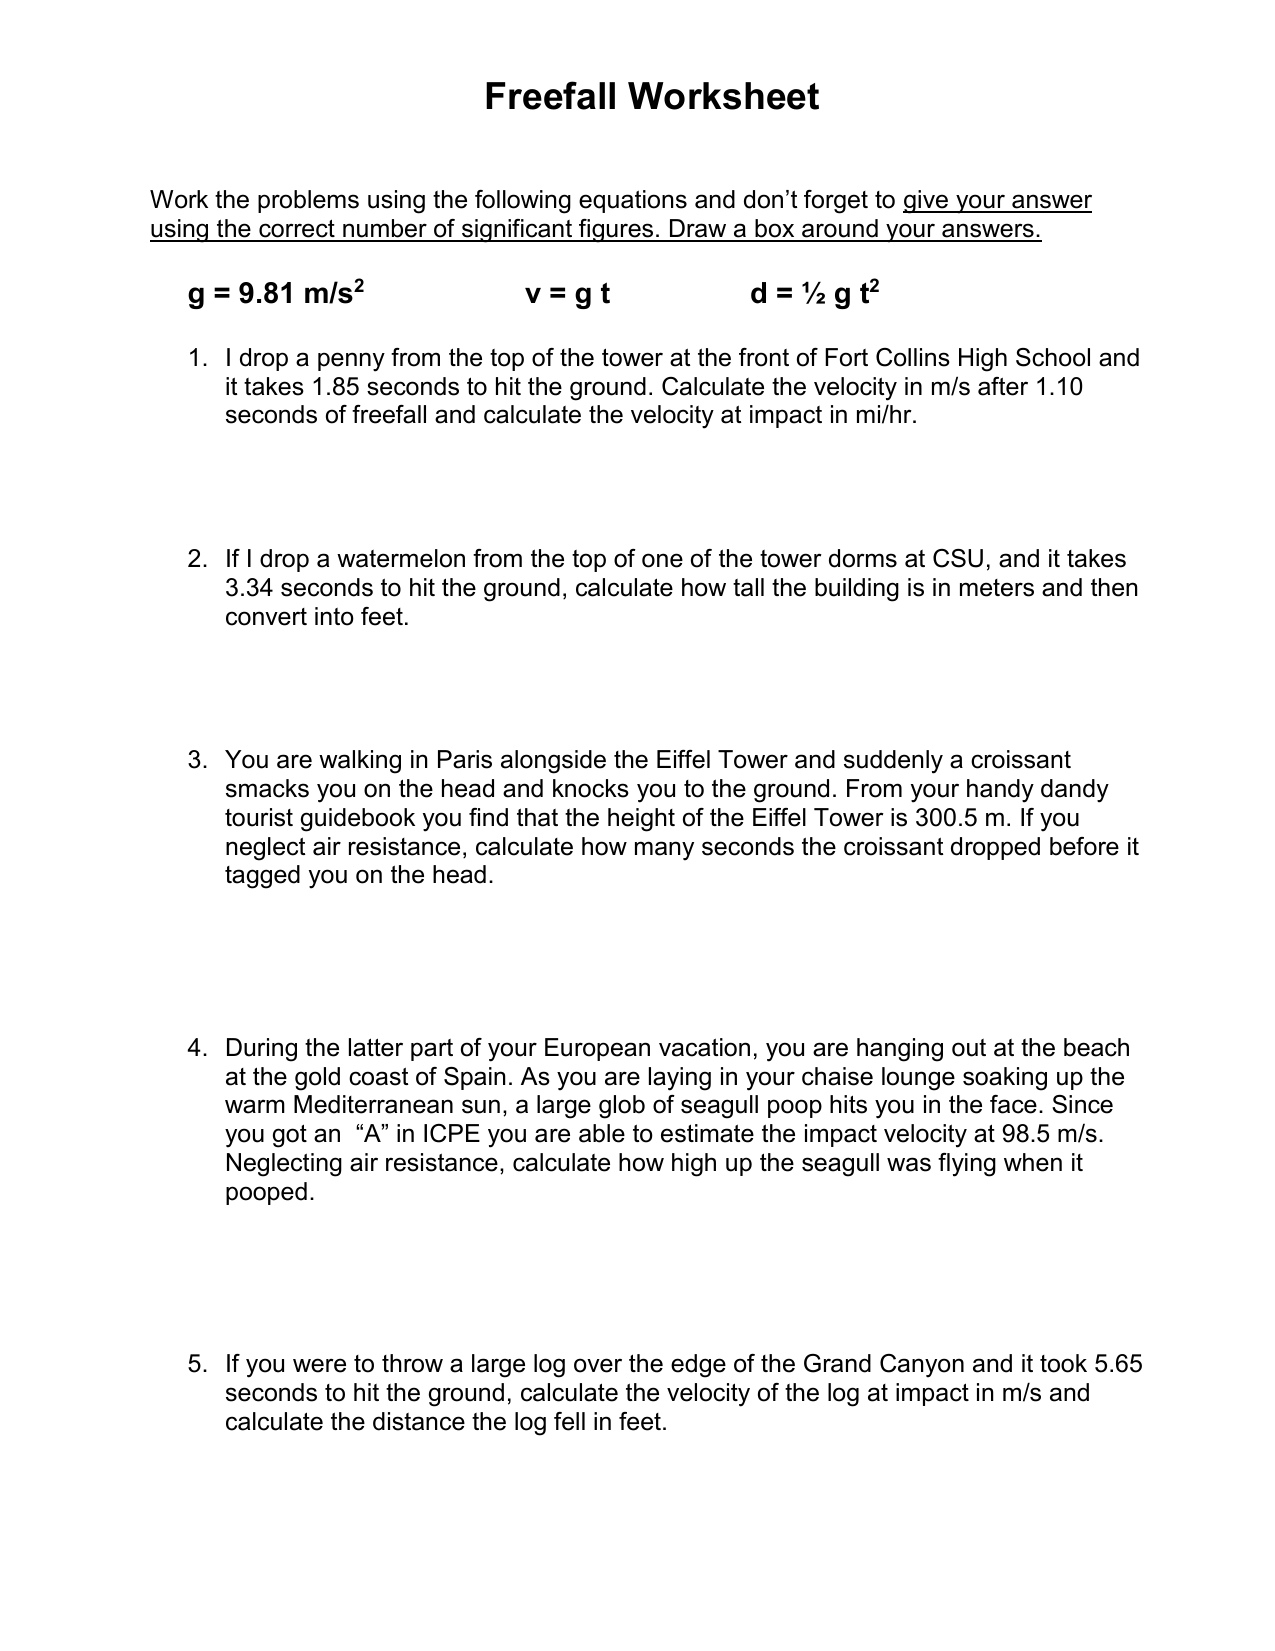 42-free-fall-worksheet-answers-worksheet-for-you